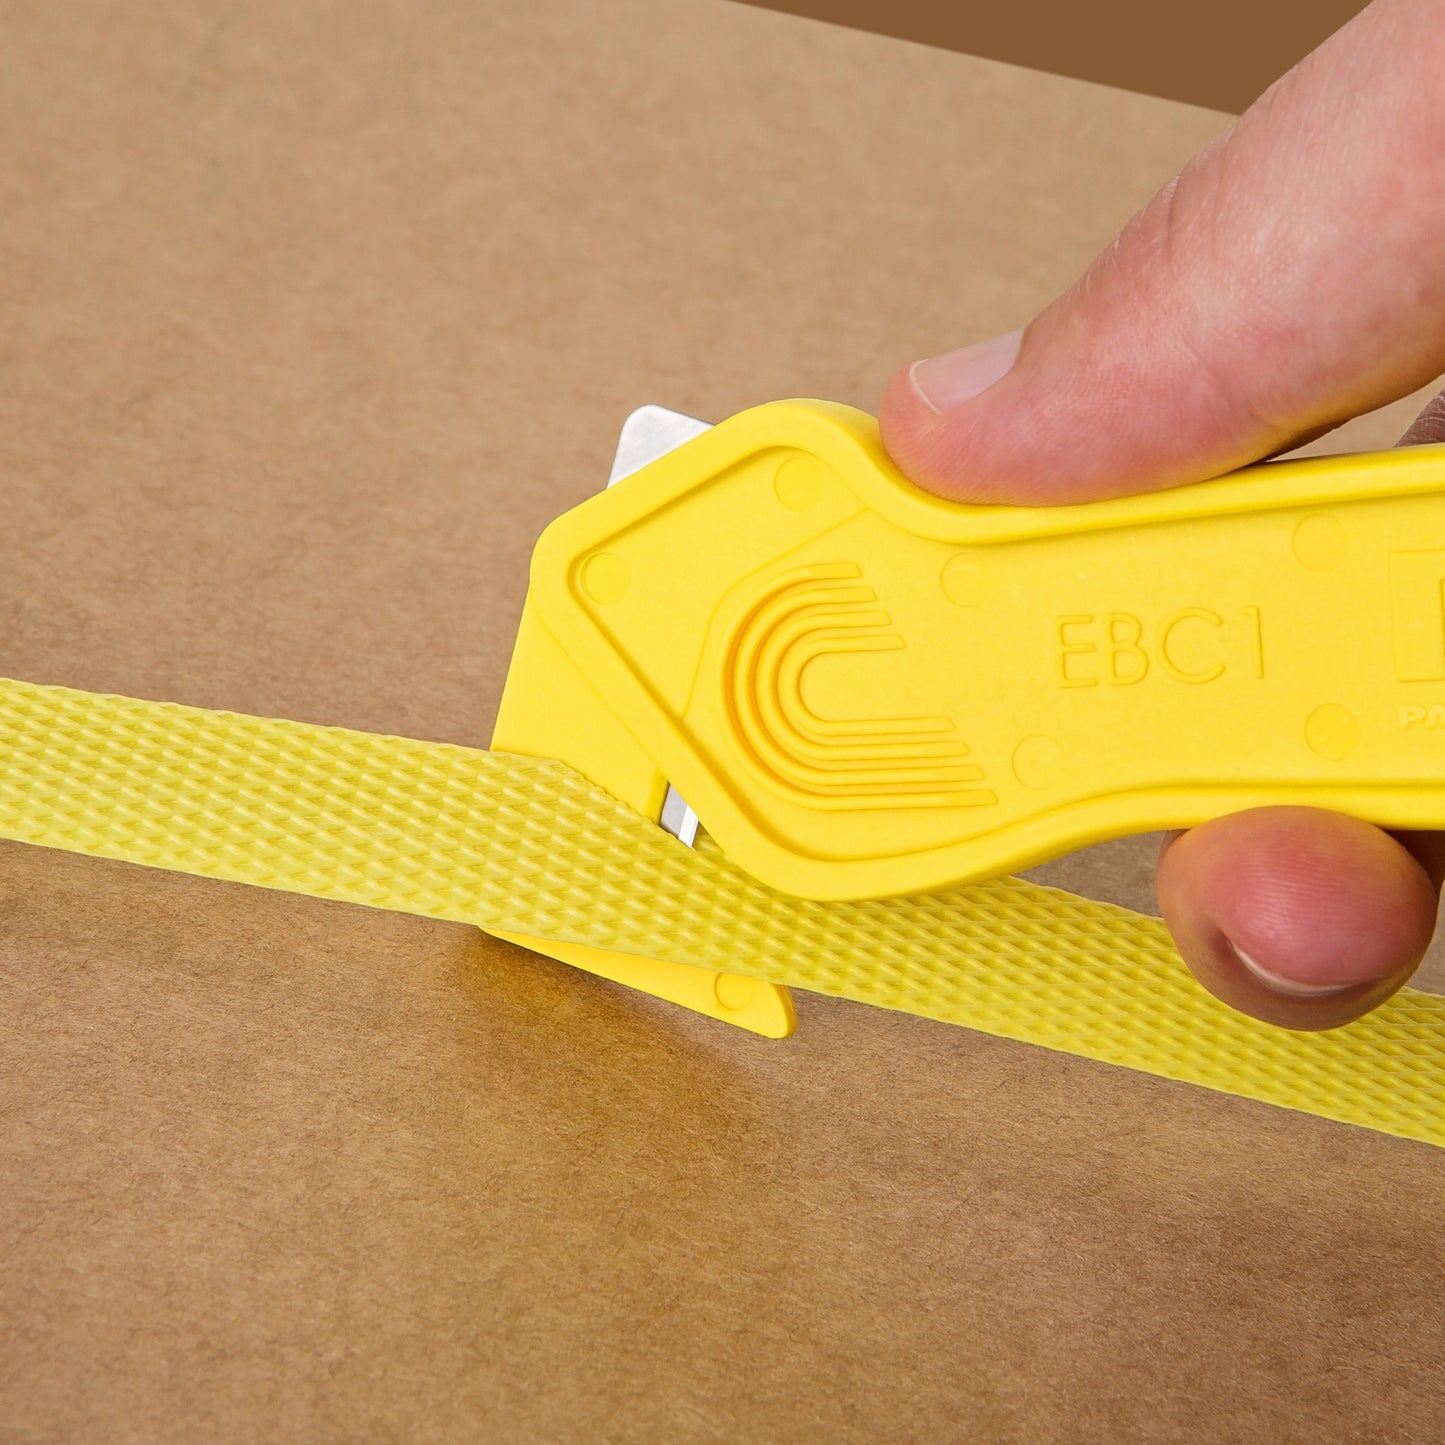 EBC1 Concealed Blade All Purpose Safety Cutter (Pack of 10) - DaltonSafety